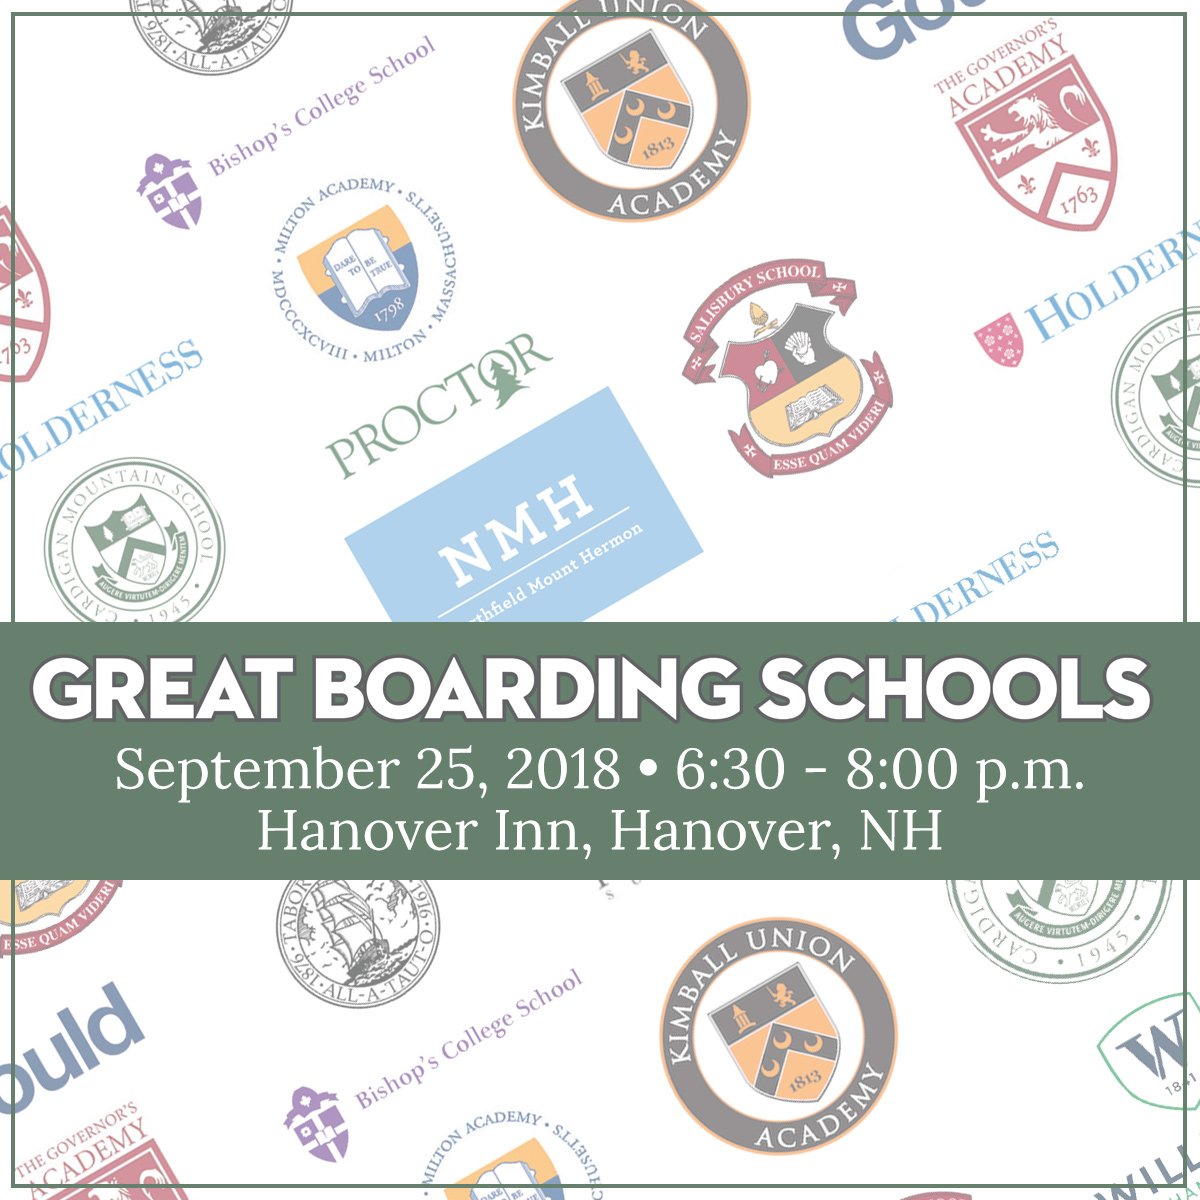 Interested in #boardingschool? Come and find out more at the Great Boarding Schools Fair! Tuesday, Sept. 25 at the @HanoverInn at 6:30pm. We hope to see you there!